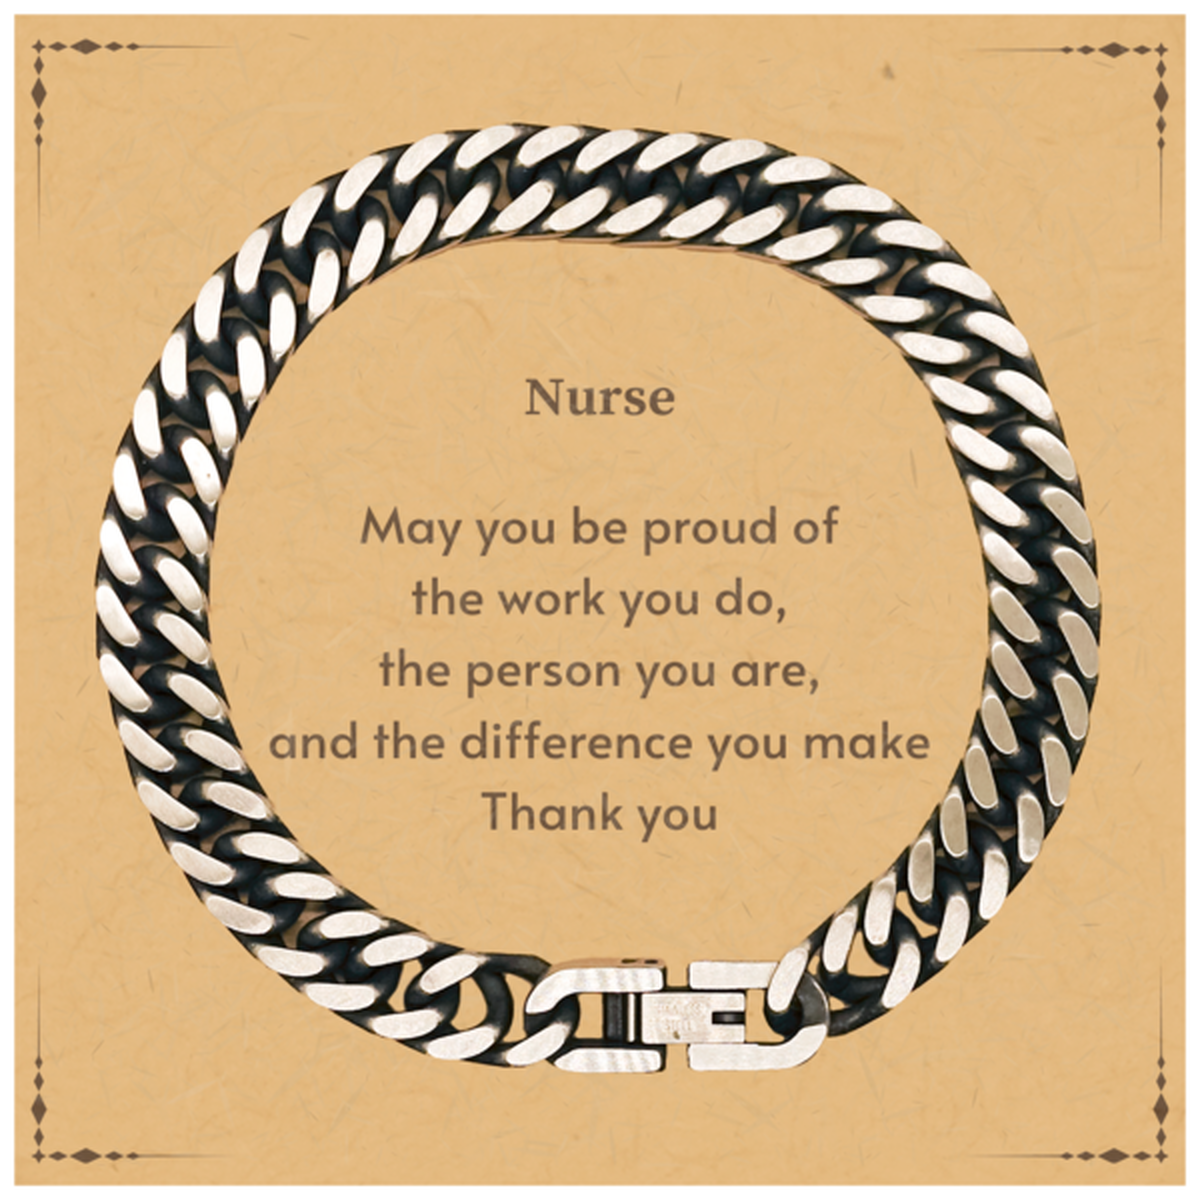 Heartwarming Cuban Link Chain Bracelet Retirement Coworkers Gifts for Nurse, Nurse May You be proud of the work you do, the person you are Gifts for Boss Men Women Friends